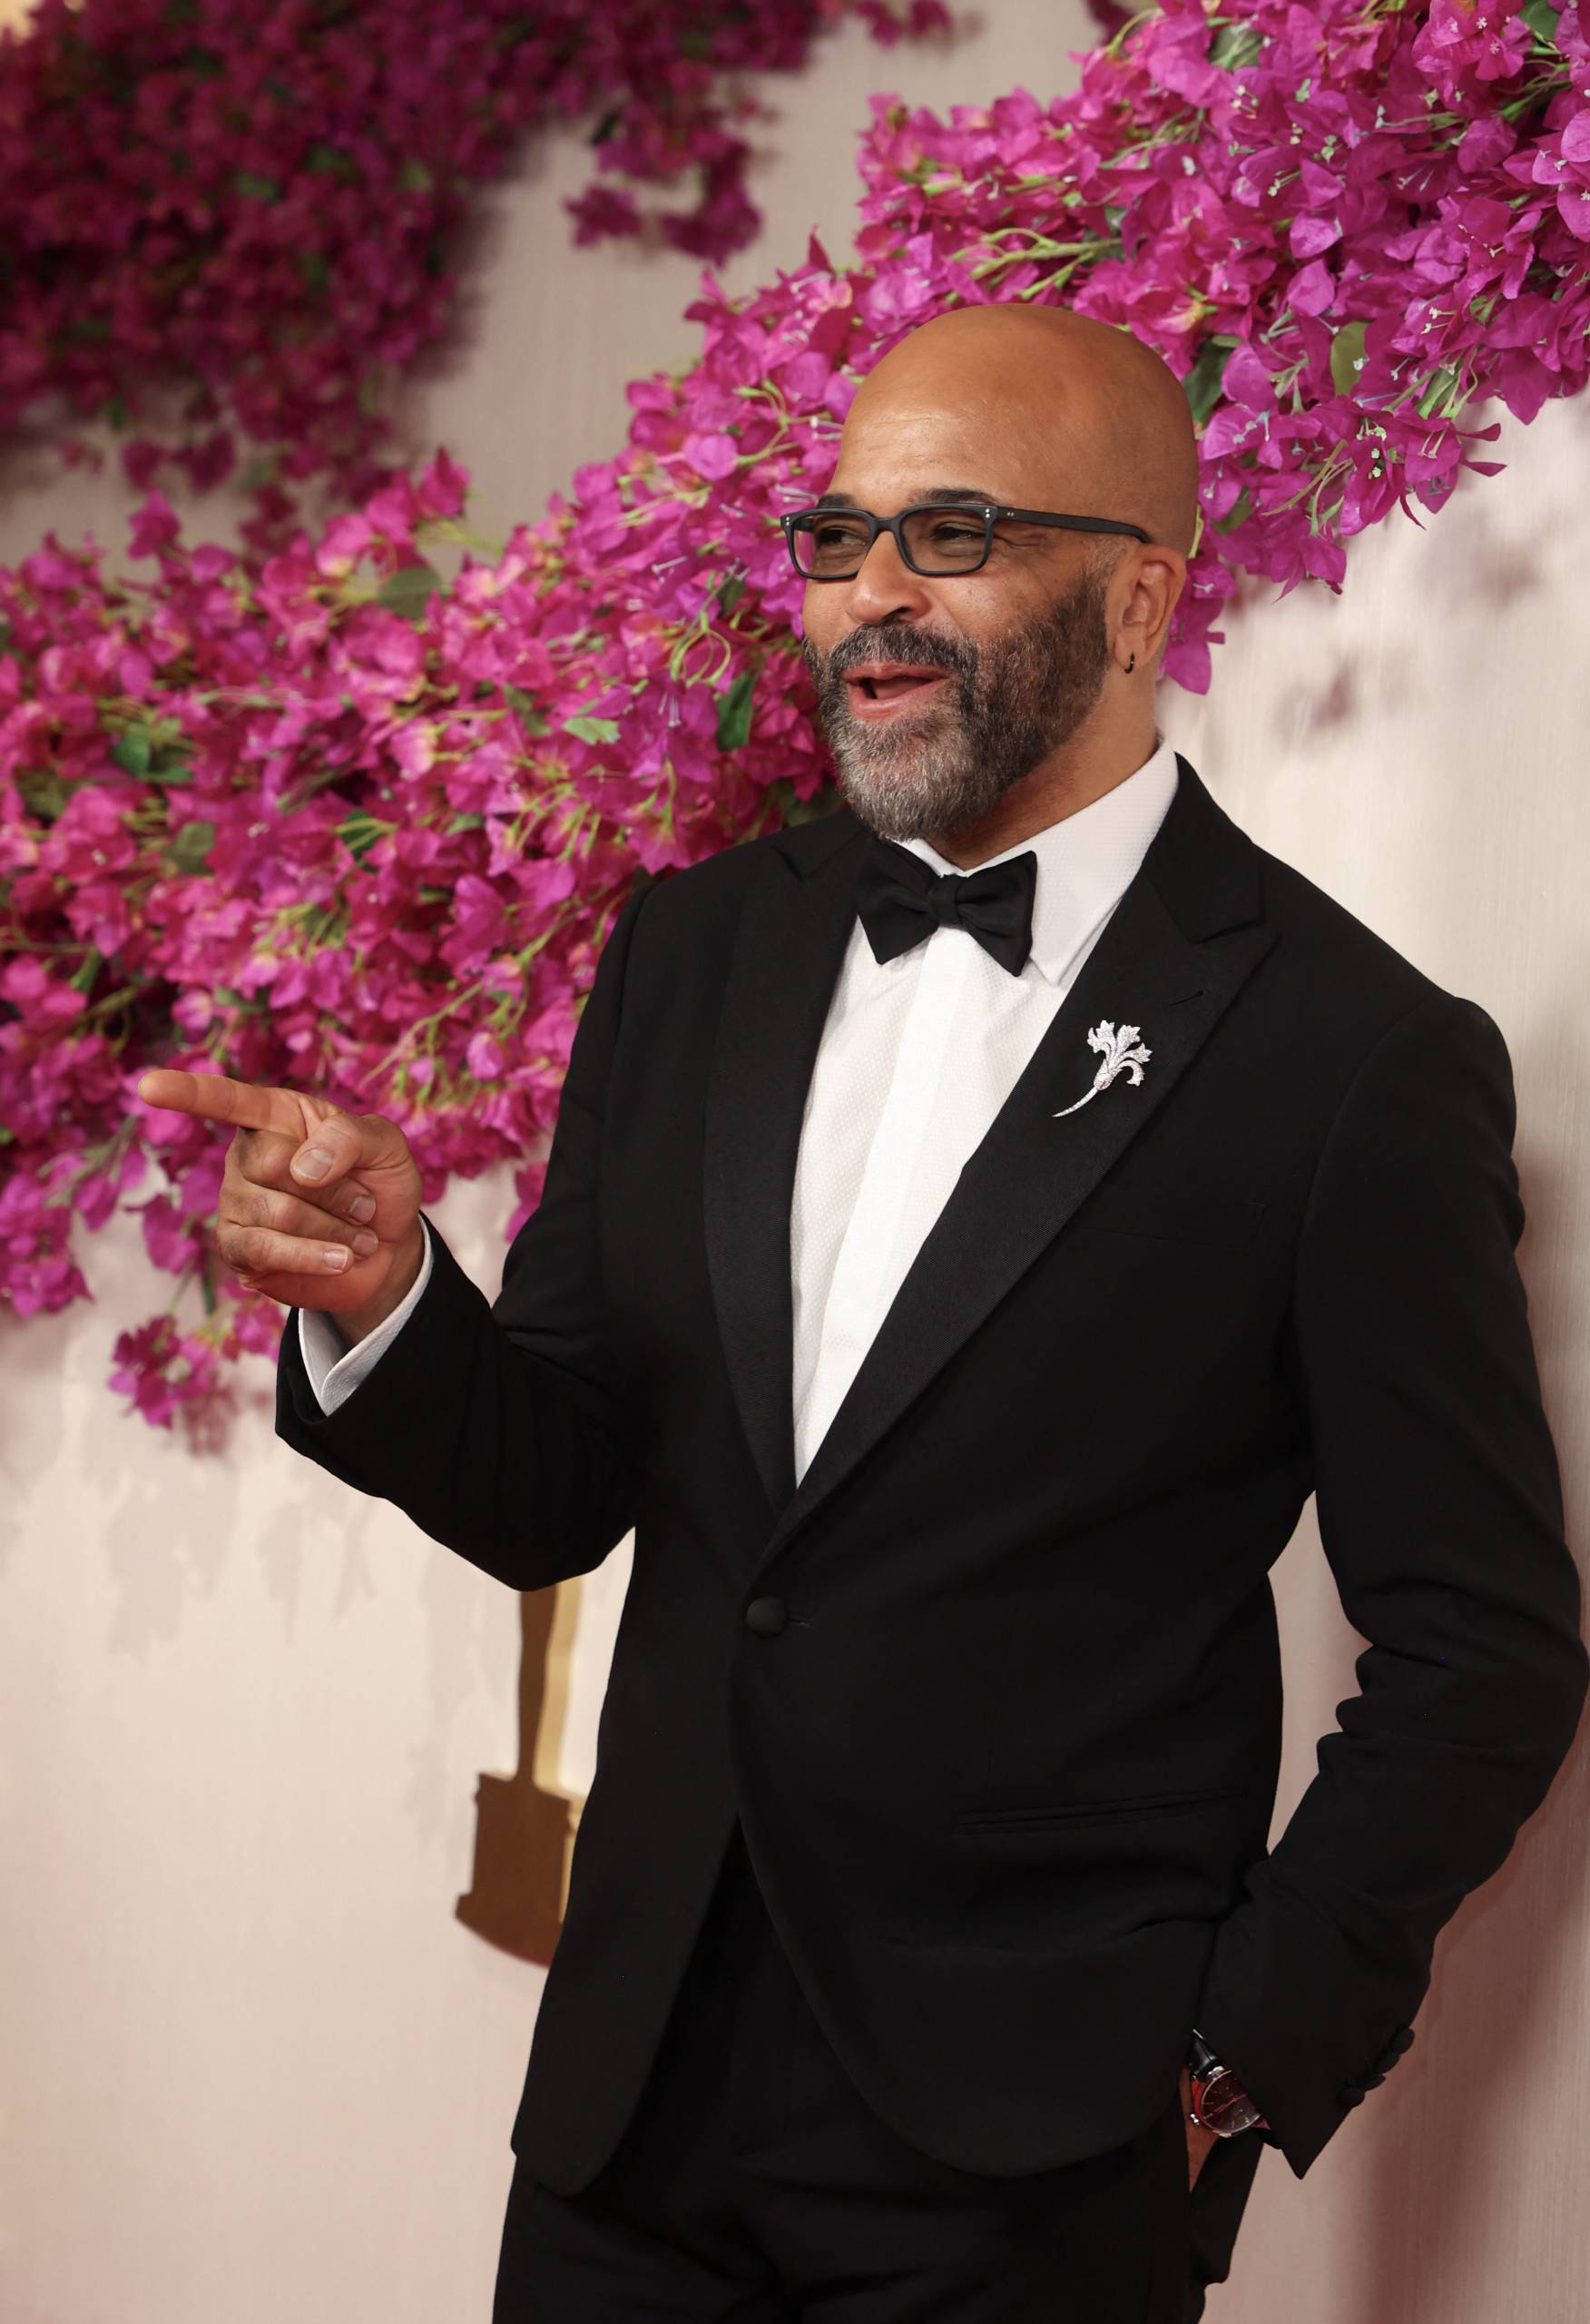 A bald Black man wearing glasses and a neat grey beard gestures on a red carpet. He's wearing a tuxedo.